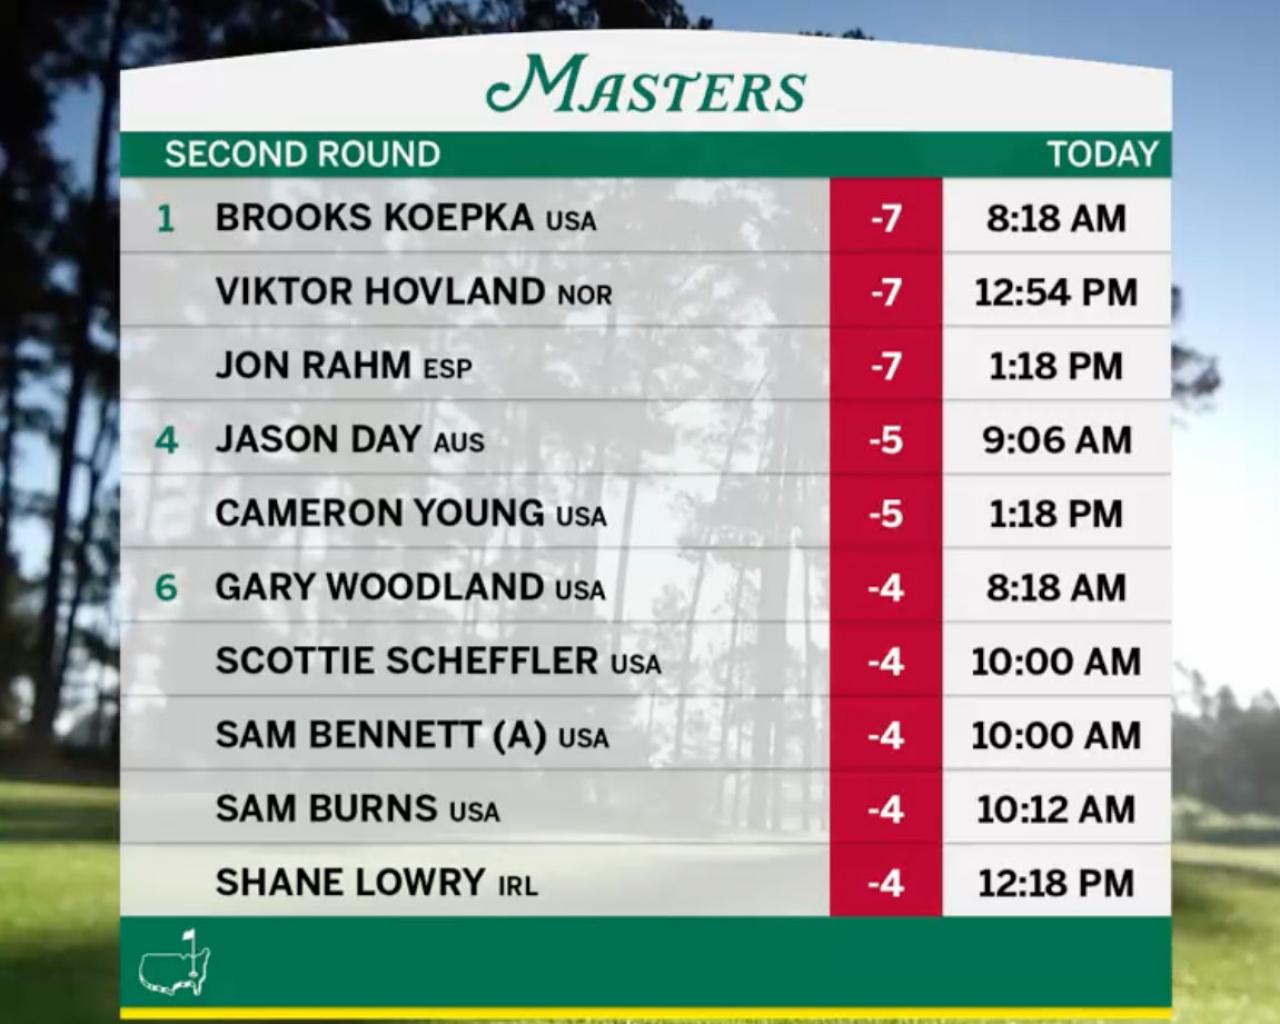 Masters 2023: Round 3 leaderboard explored after suspension of play